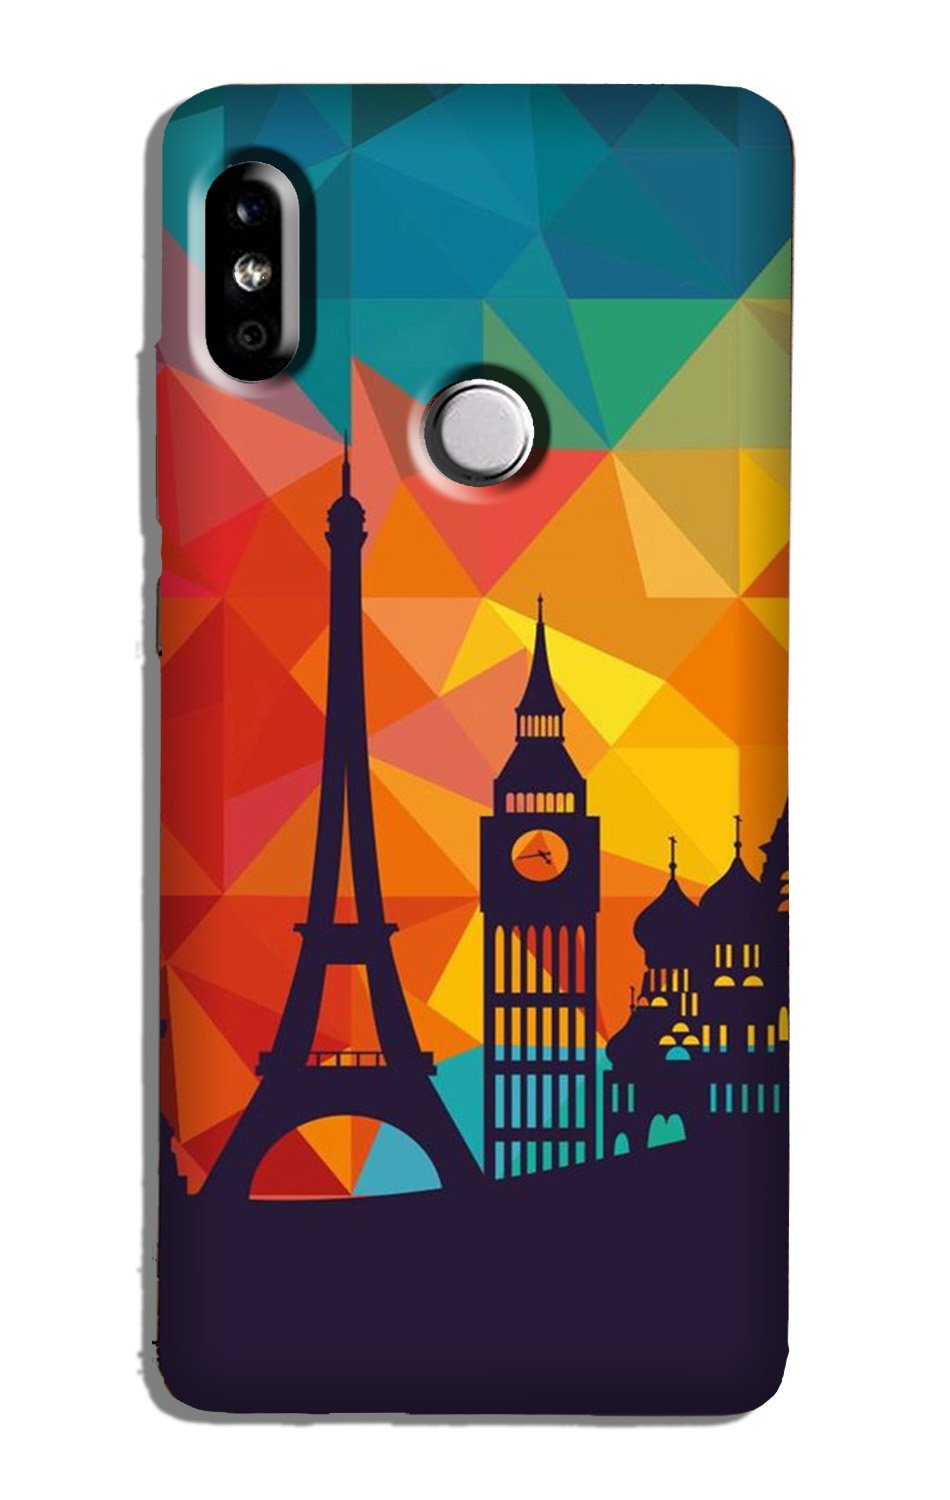 Eiffel Tower Case for Redmi Note 5 Pro